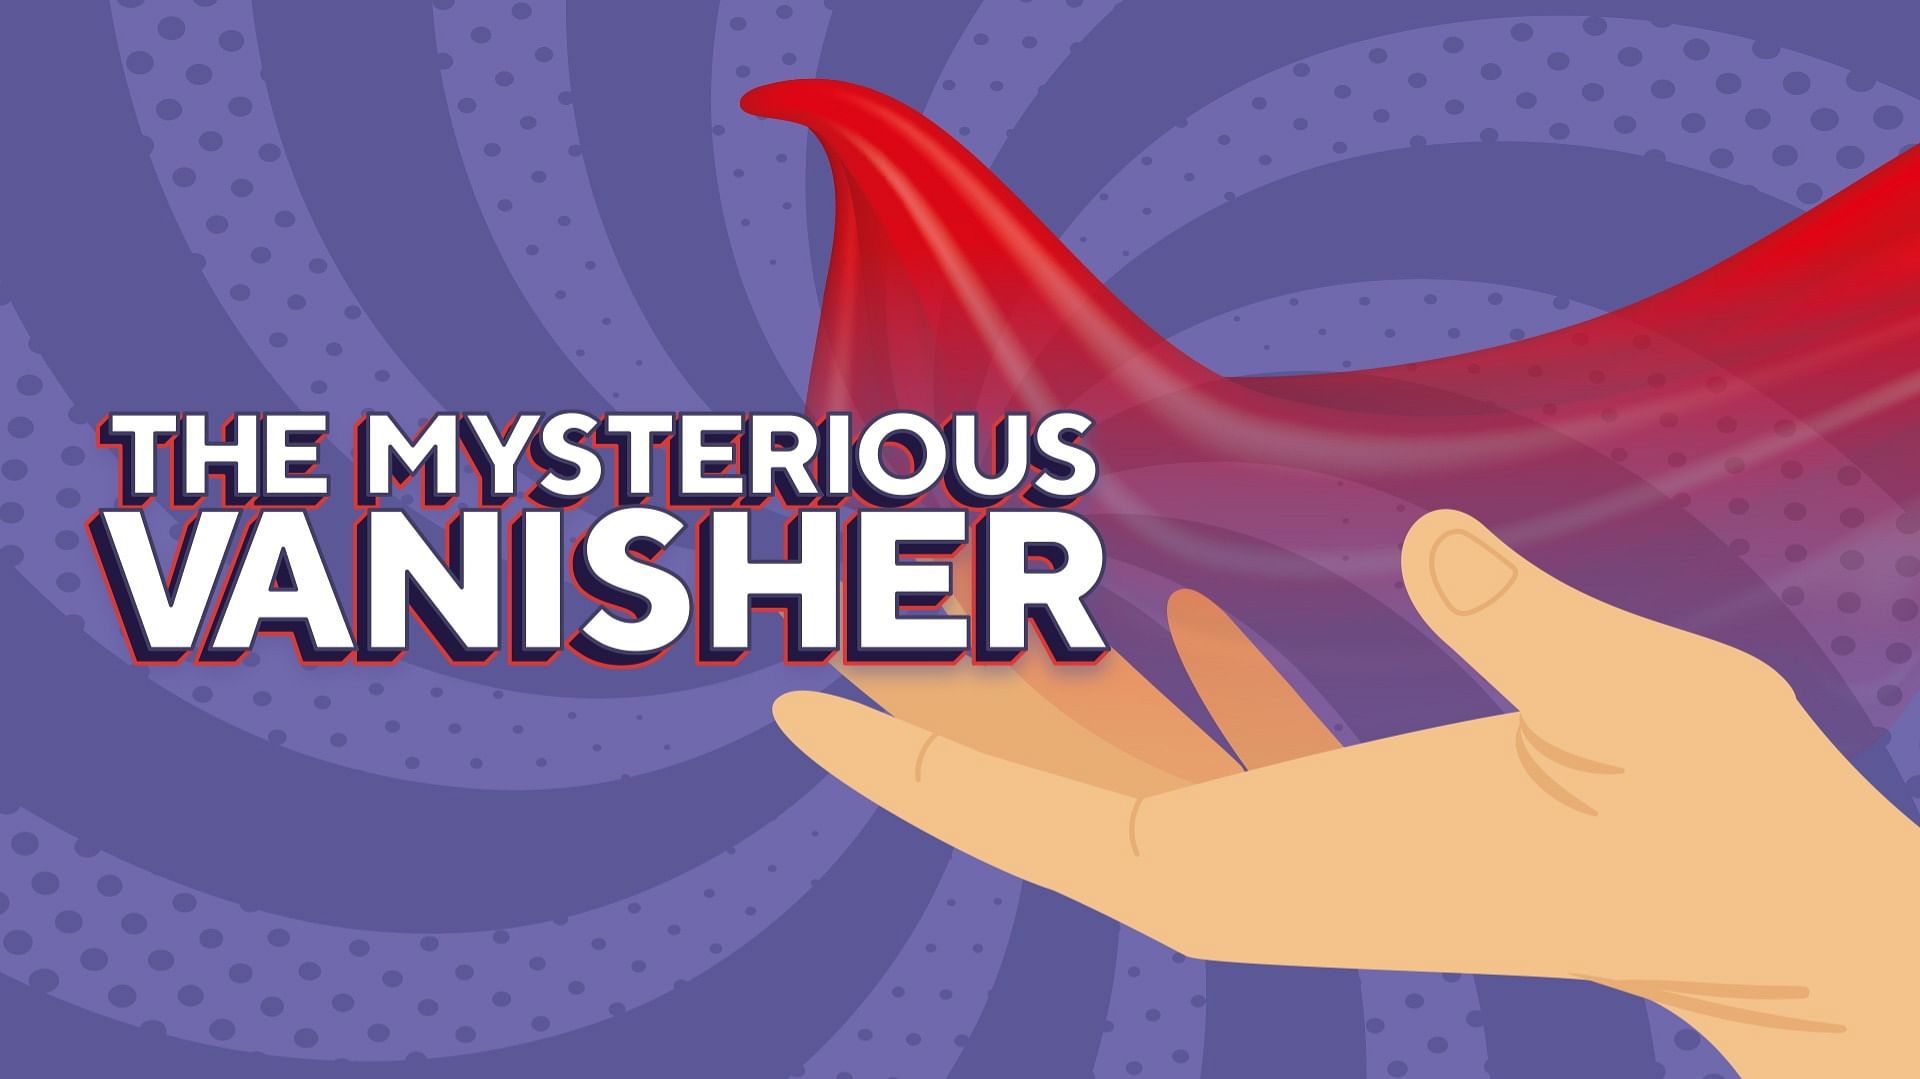 The Mysterious Vanisher